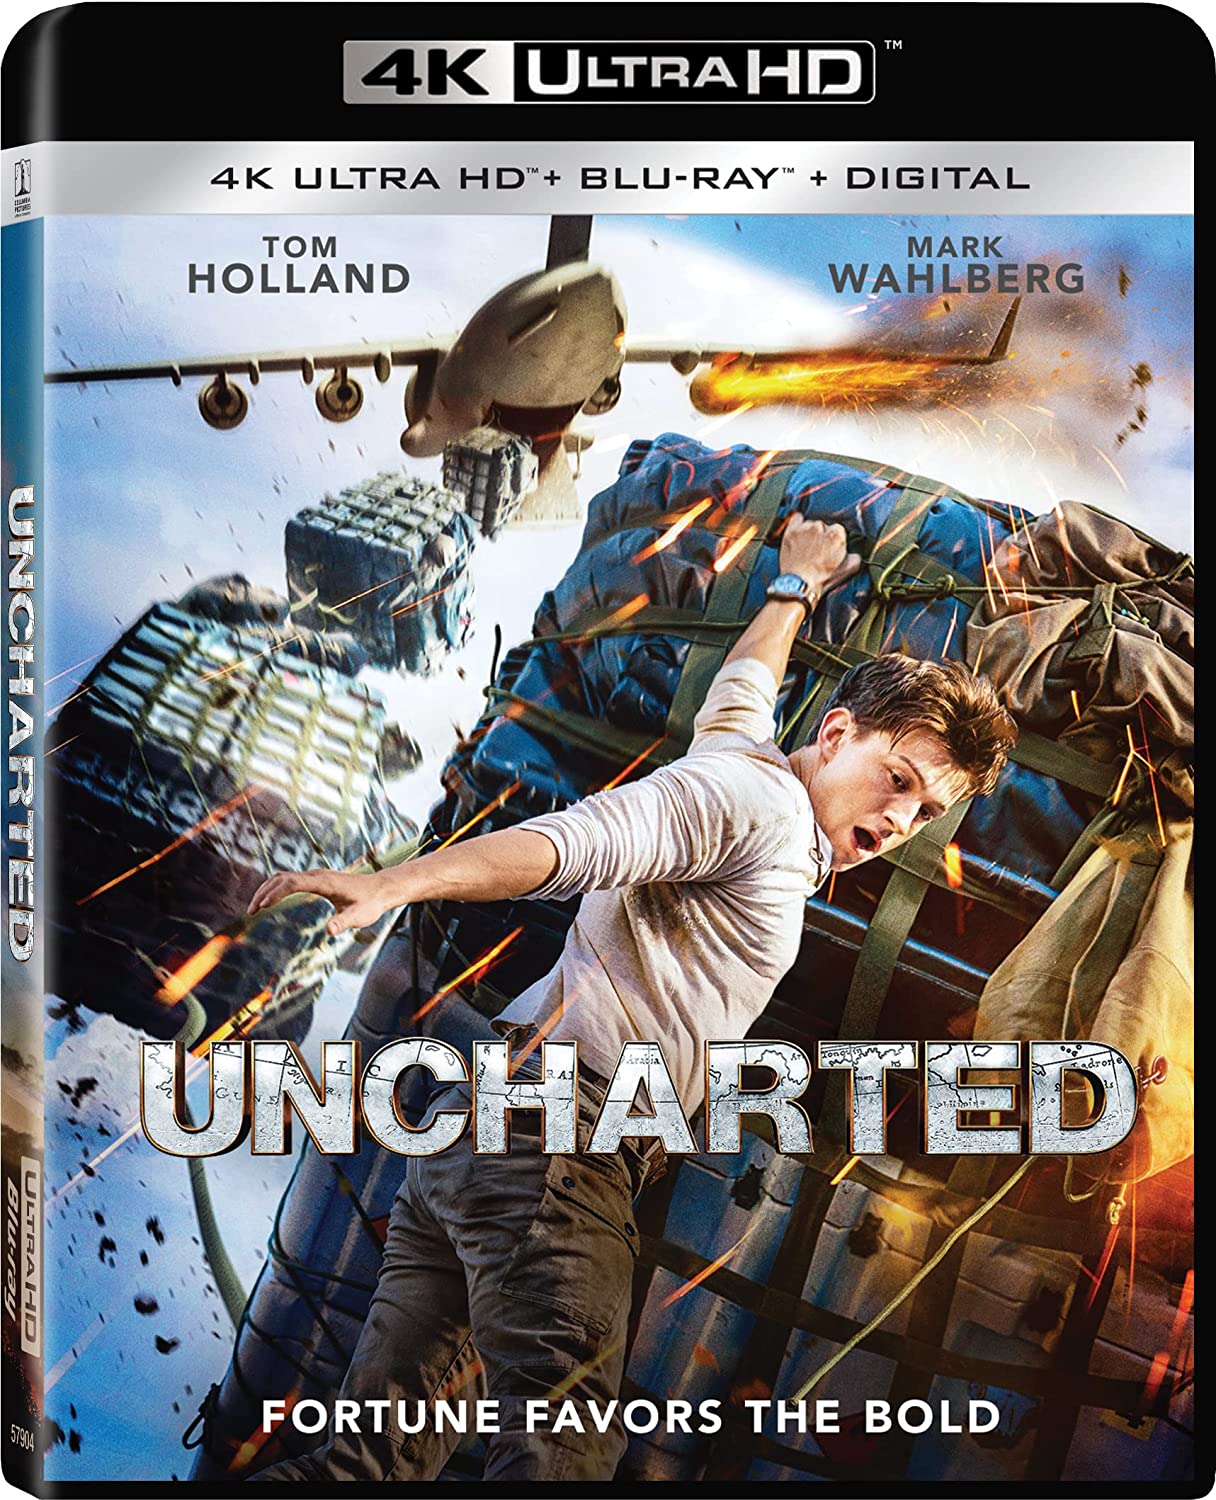 Uncharted 4k Blu-ray front